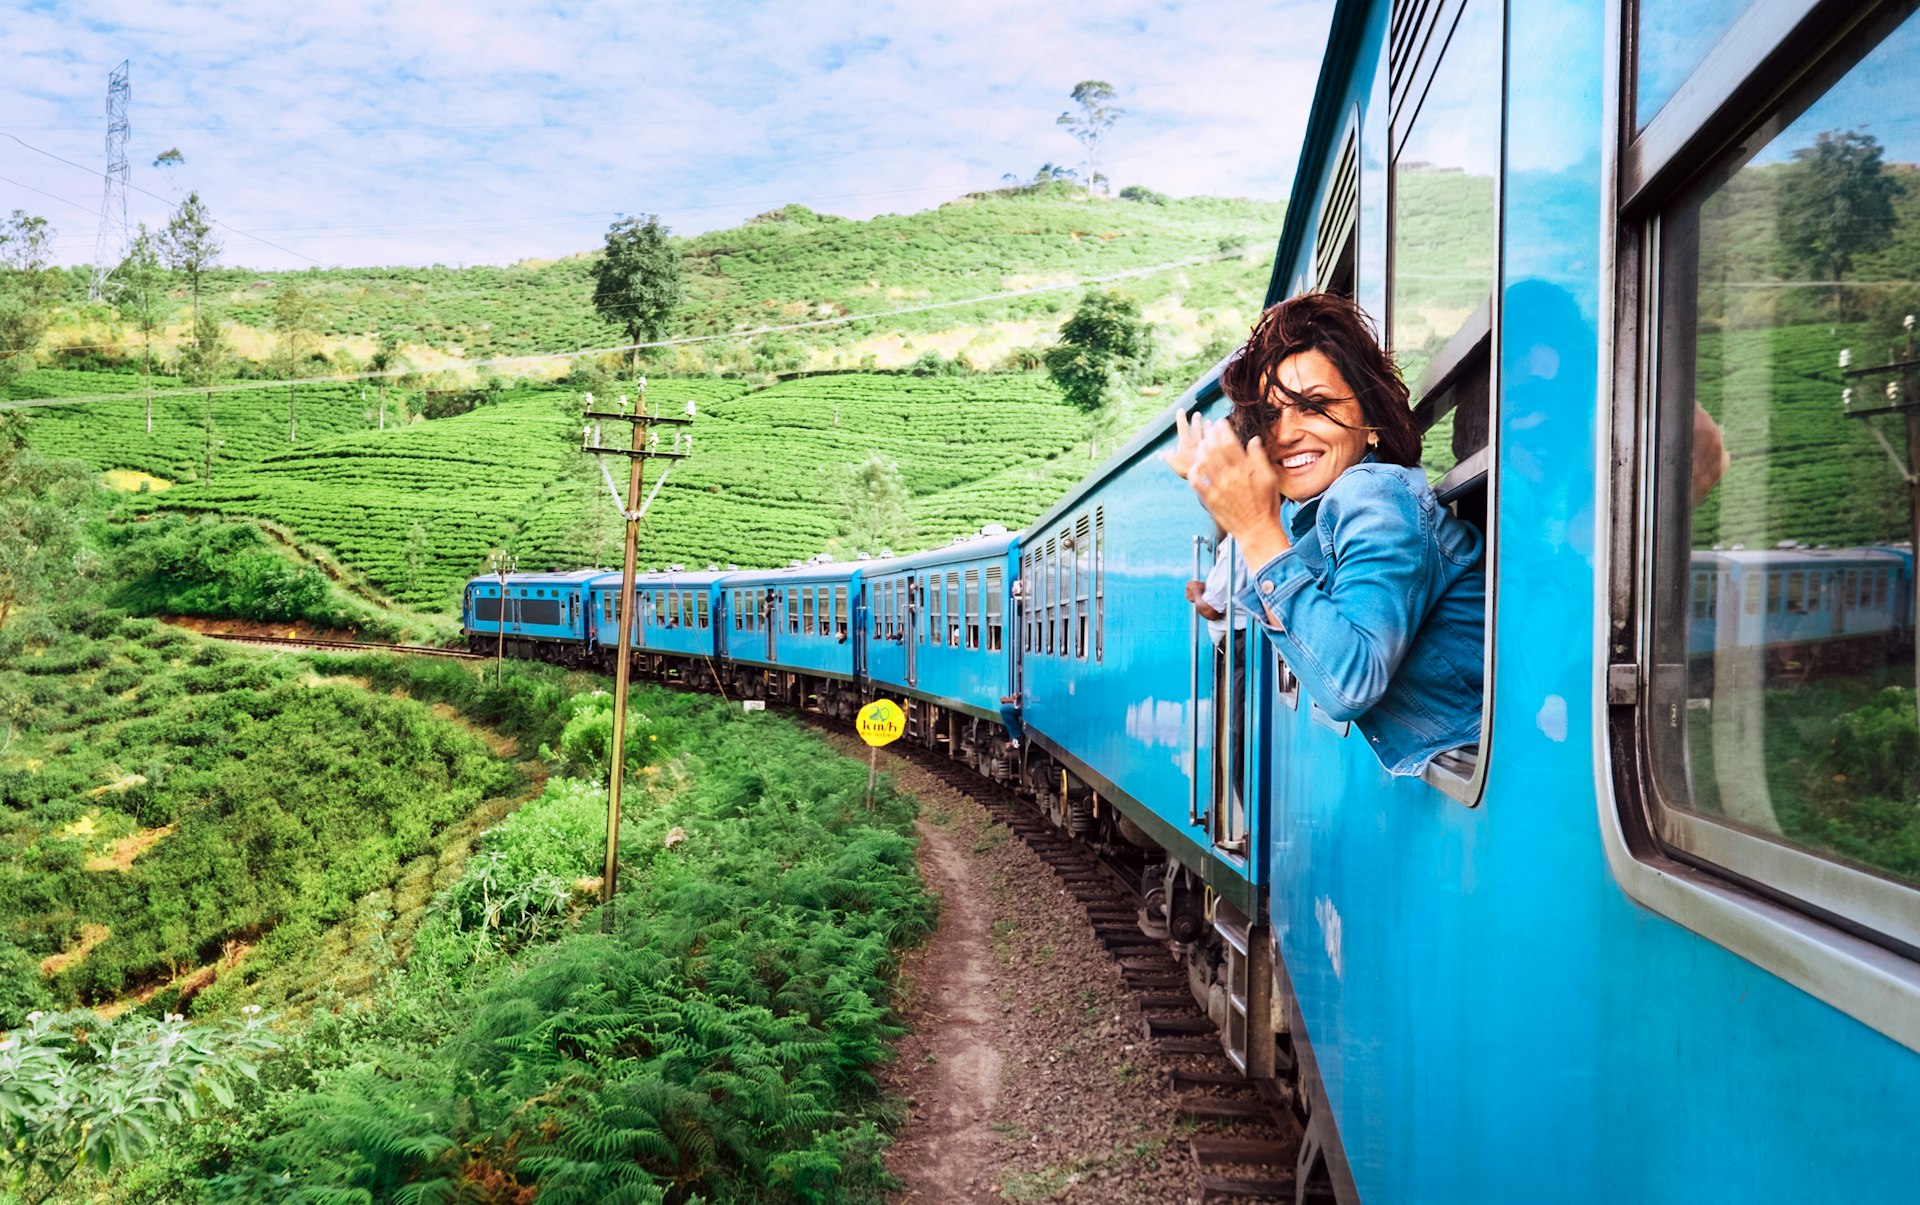 A smiling woman looks out from a train window as it travels through a hillside location covered in greenery